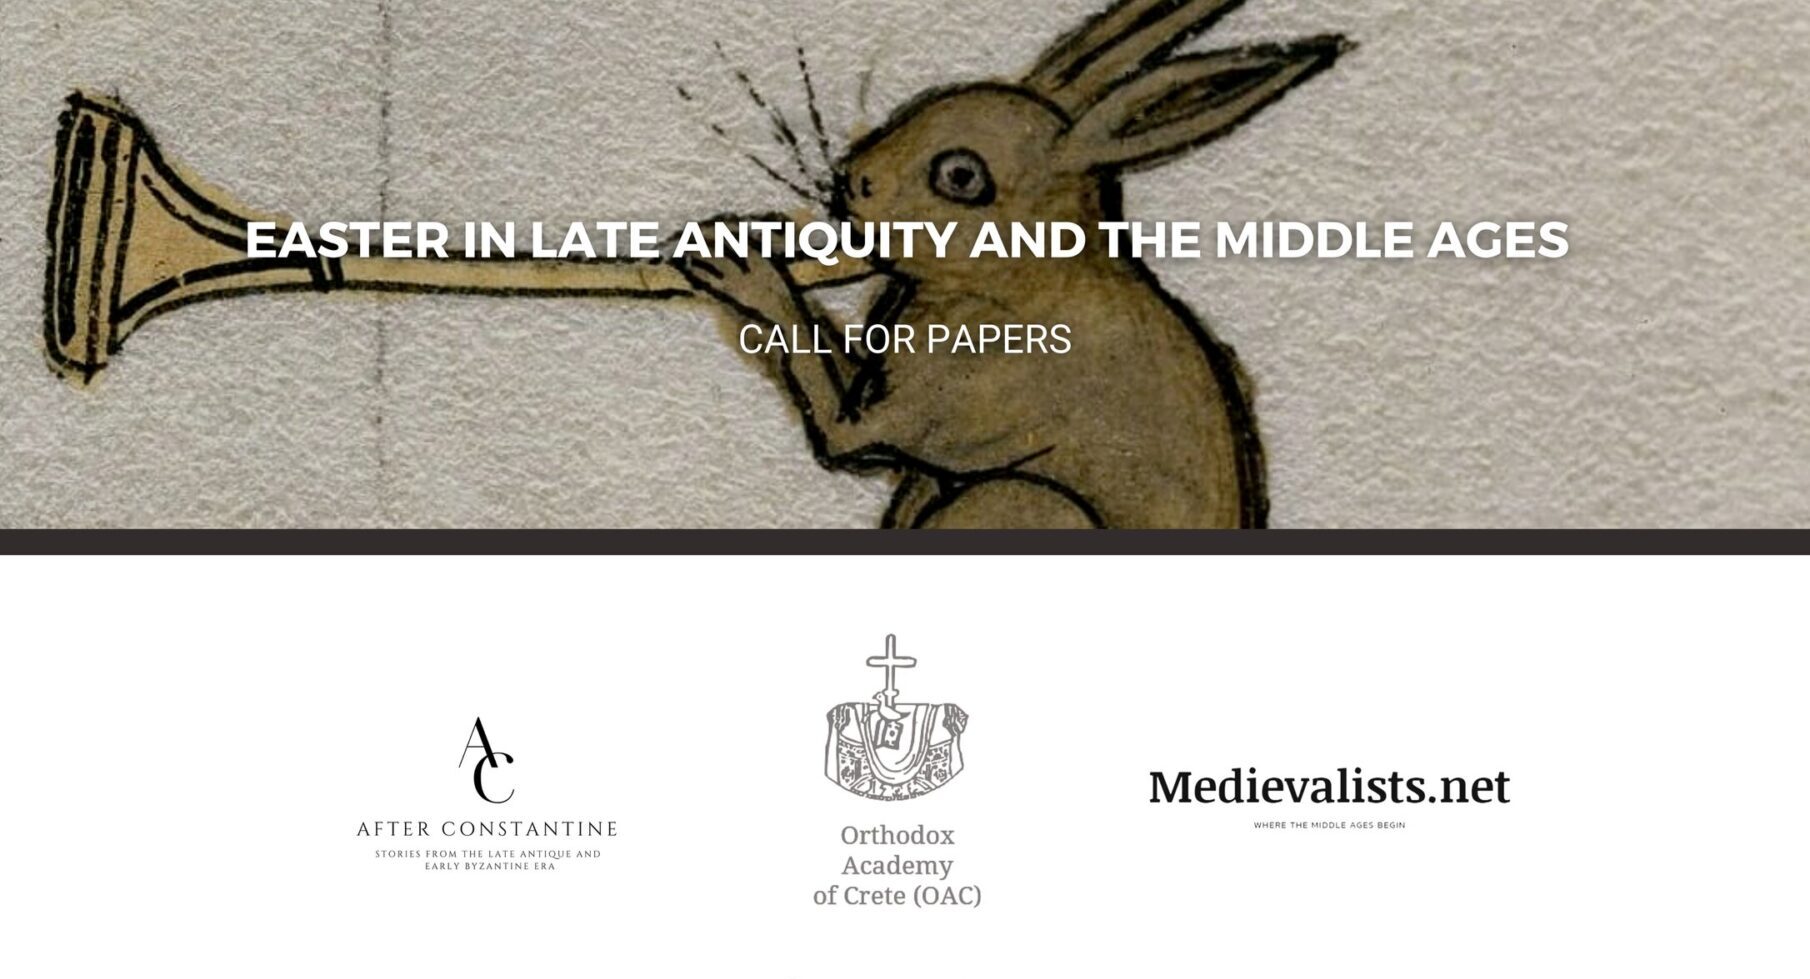 Call for Papers: Easter in Late Antiquity and the Middle Ages